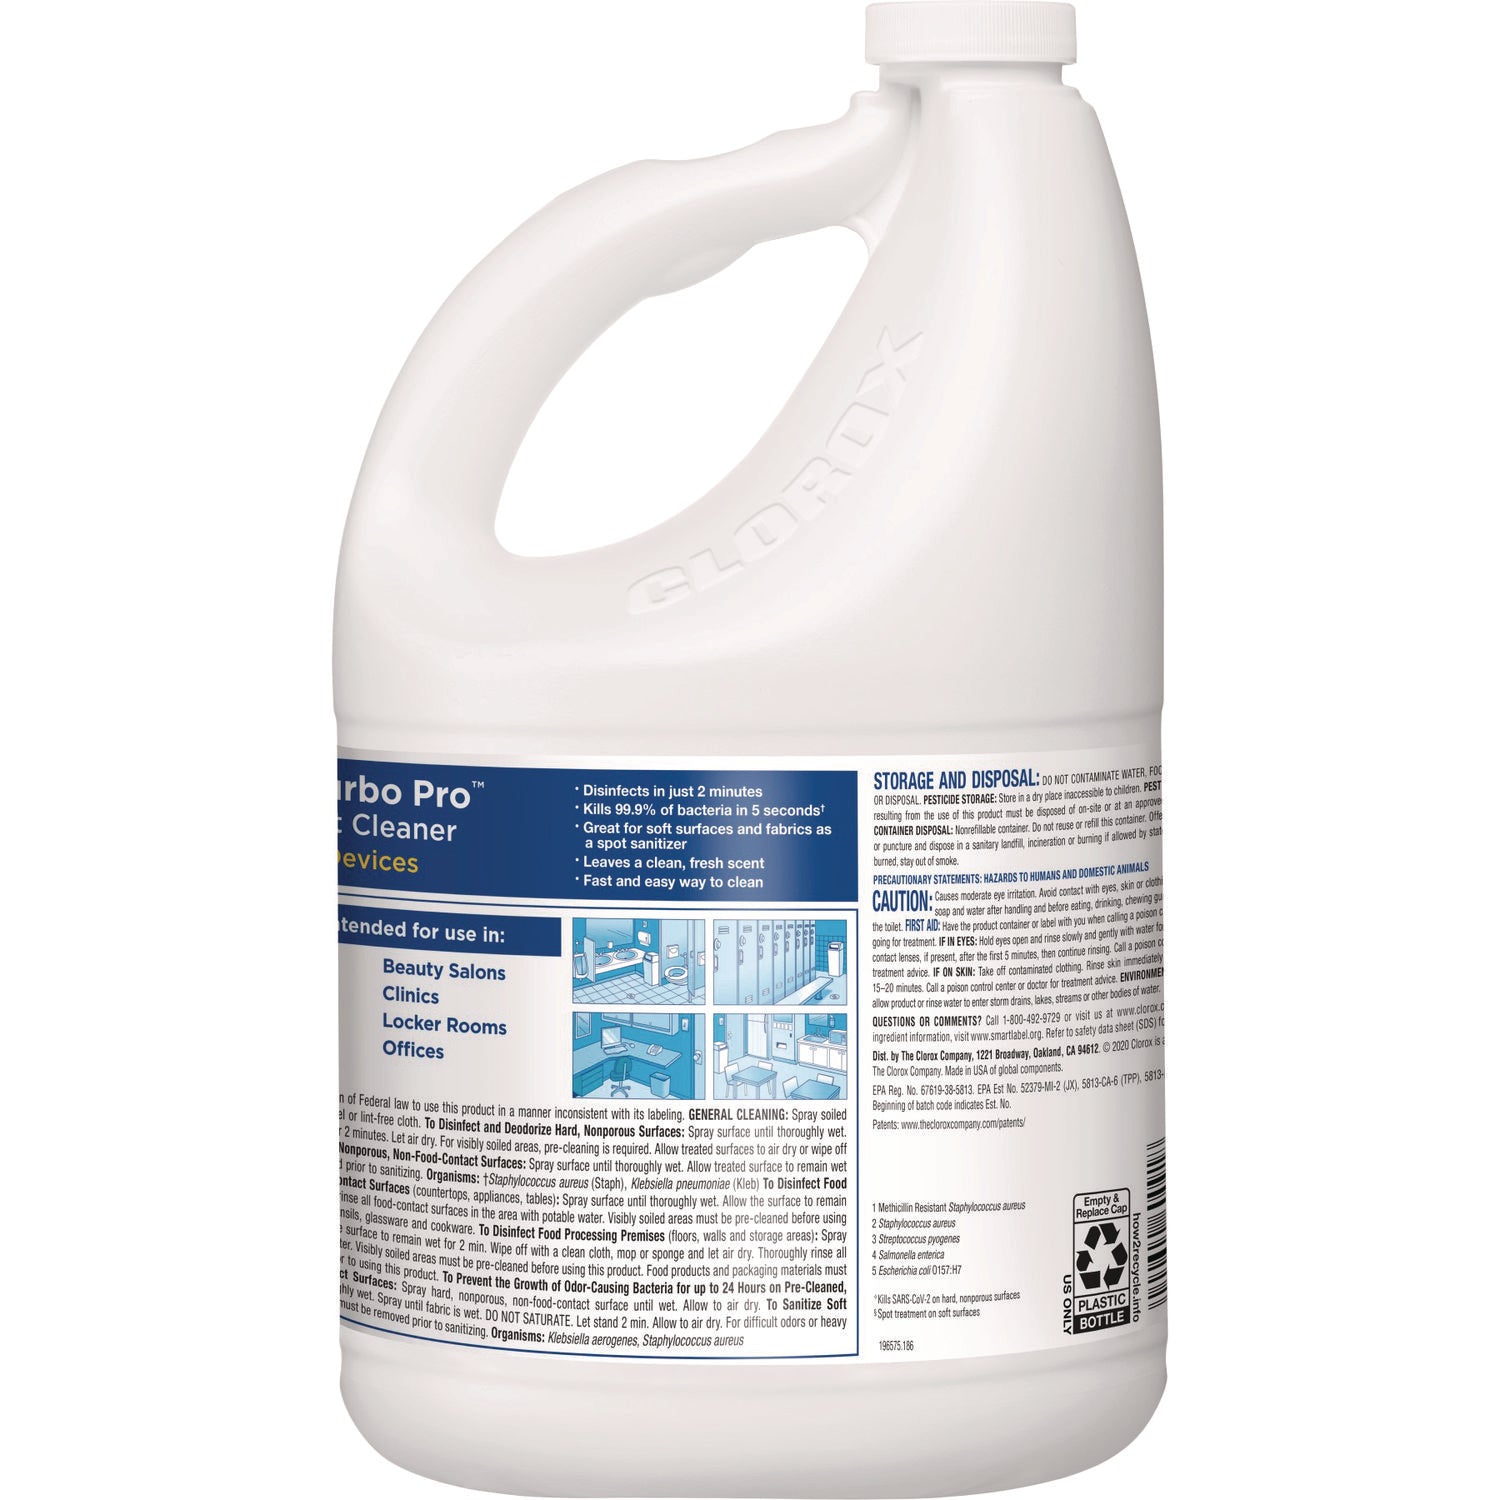 Turbo Pro Disinfectant Cleaner for Sprayer Devices, 121 oz Bottle, 3/Carton - 4